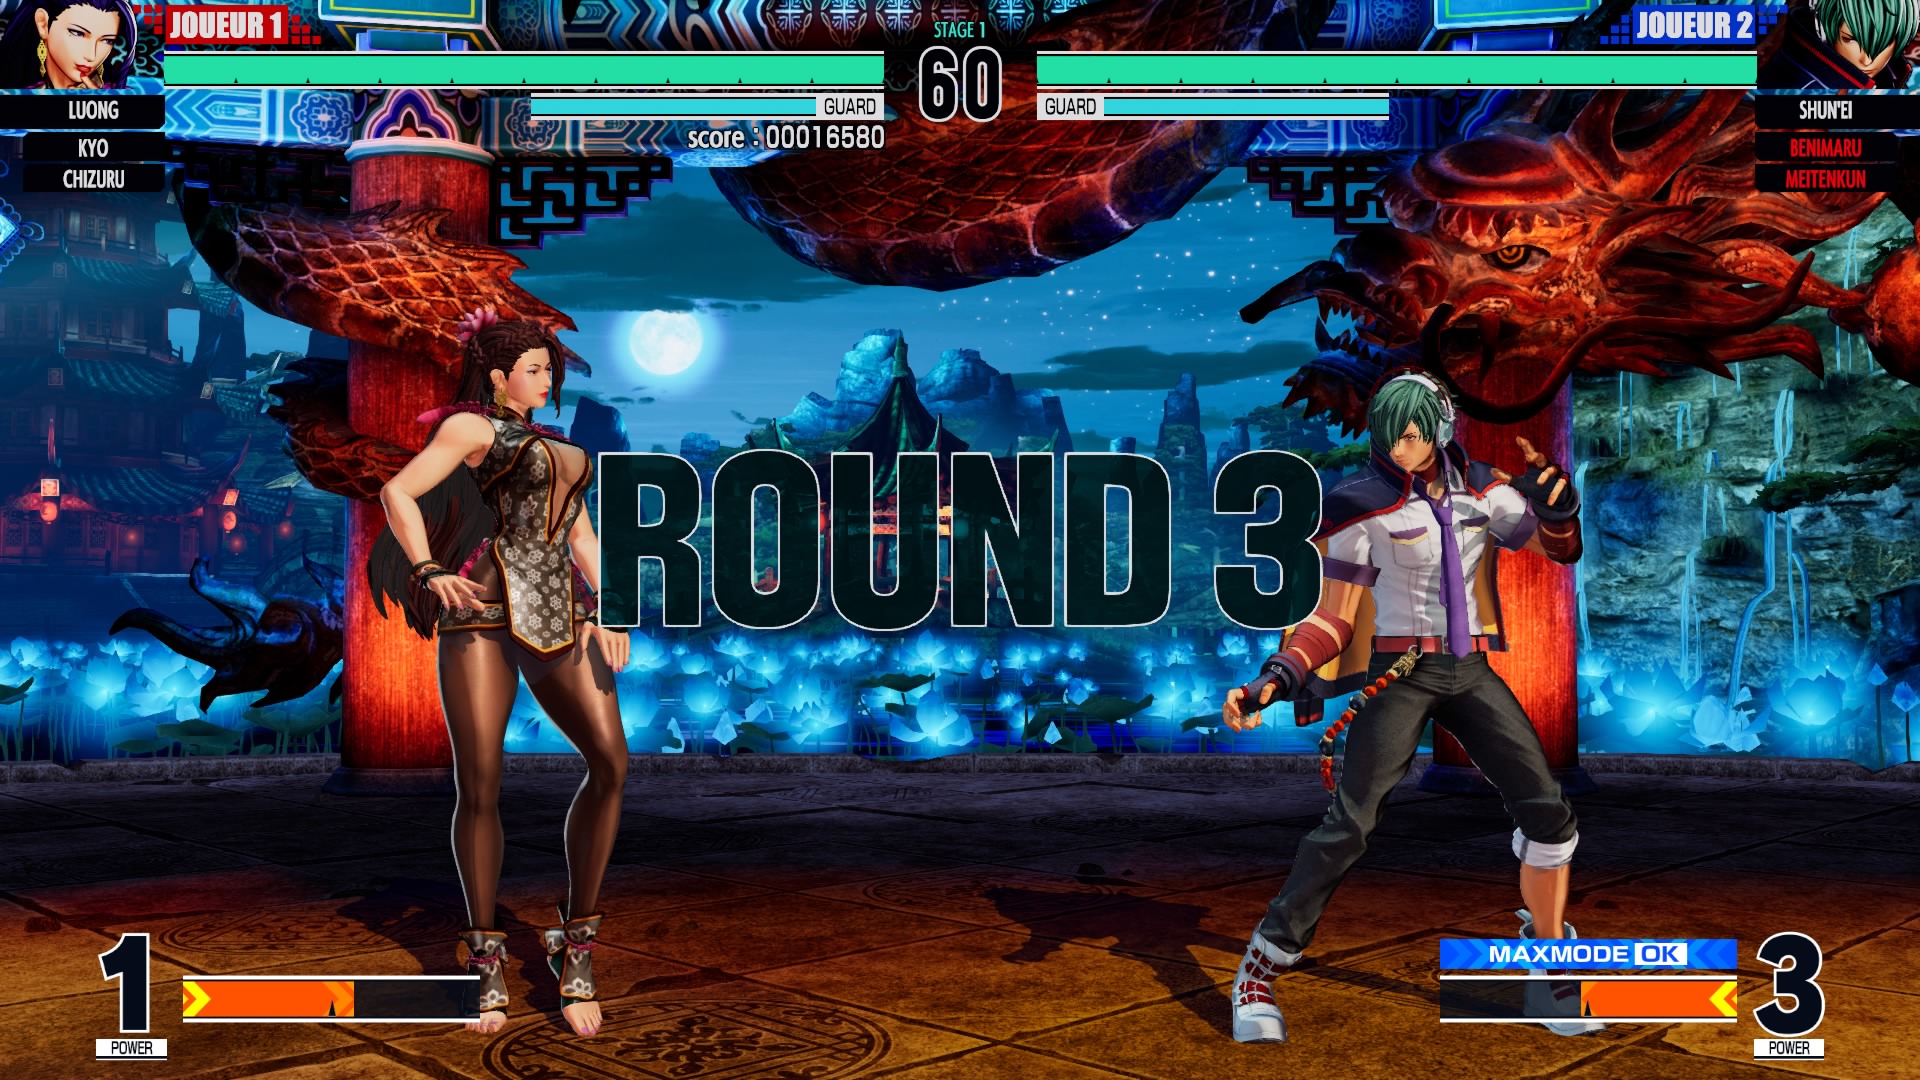 The King of Fighters XV Luong Round 3